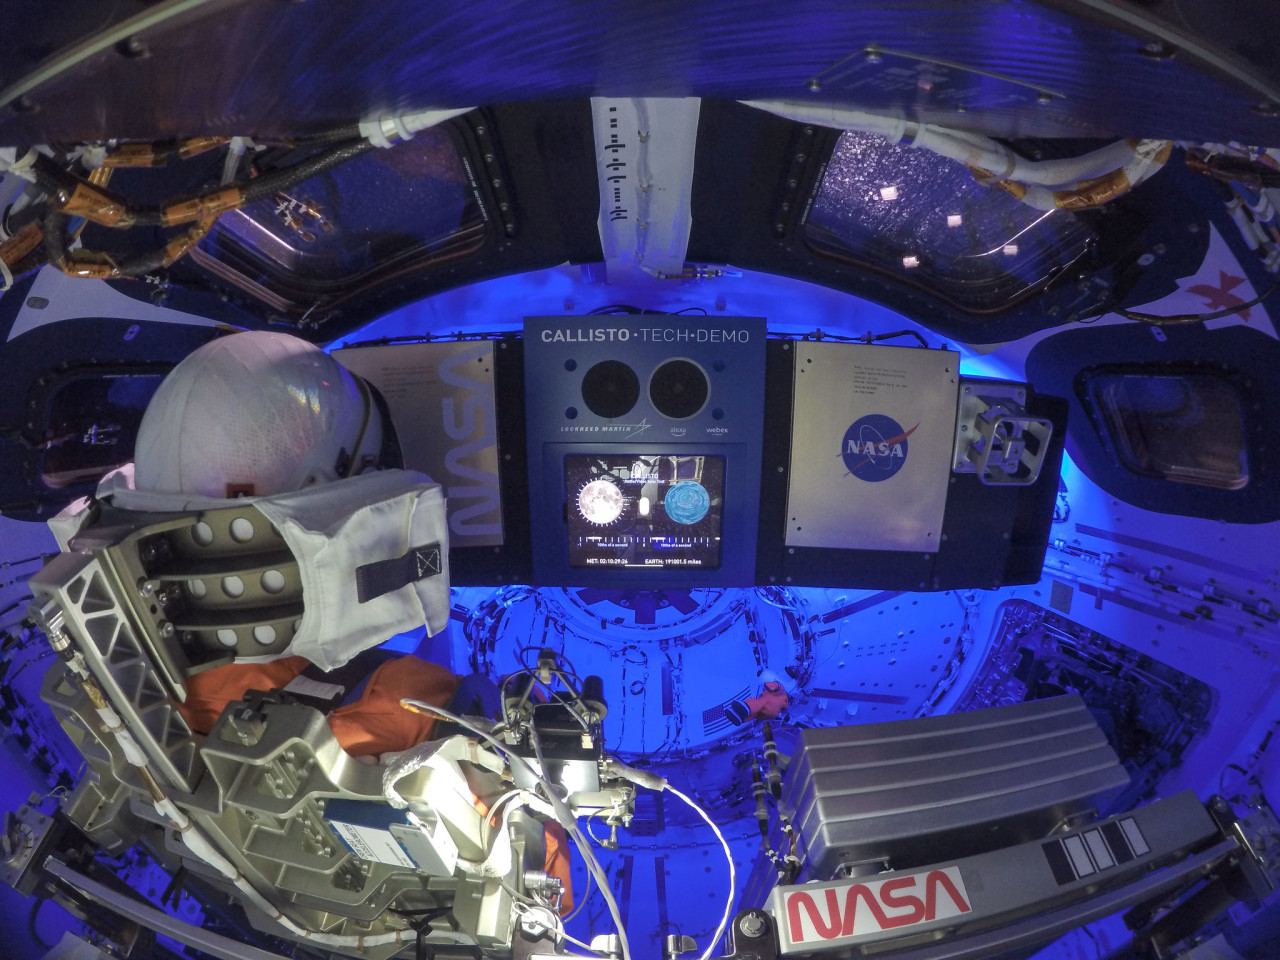 Commander Moonikin Campos is visible in the commander’s seat in this image inside of the Orion spacecraft. You can also spot Snoopy, the zero-gravity indicator aboard, floating in the background. Credit: NASA